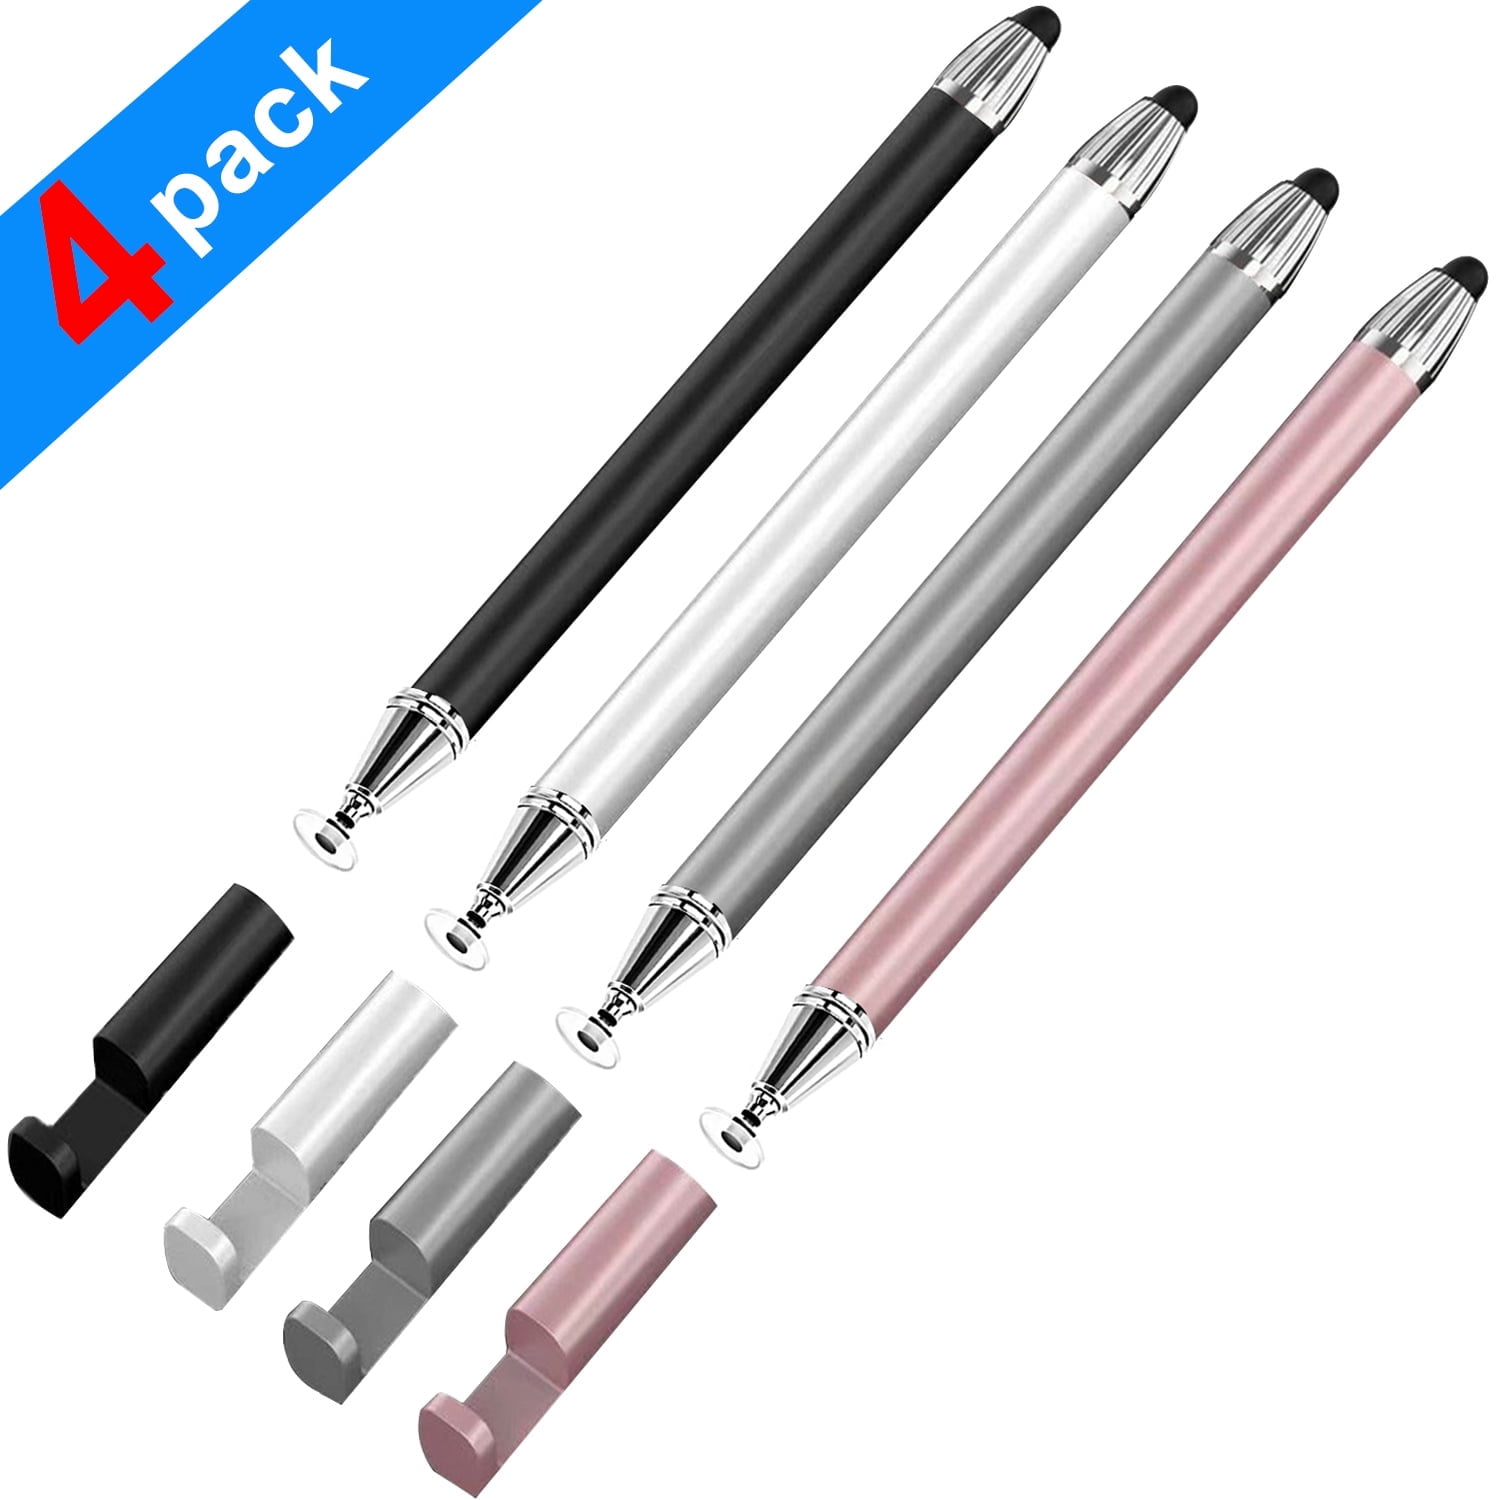 Stylus Pen 3 in 1 Touch Screen Universal for iPad iPhone Samsung Galaxy  Tablet